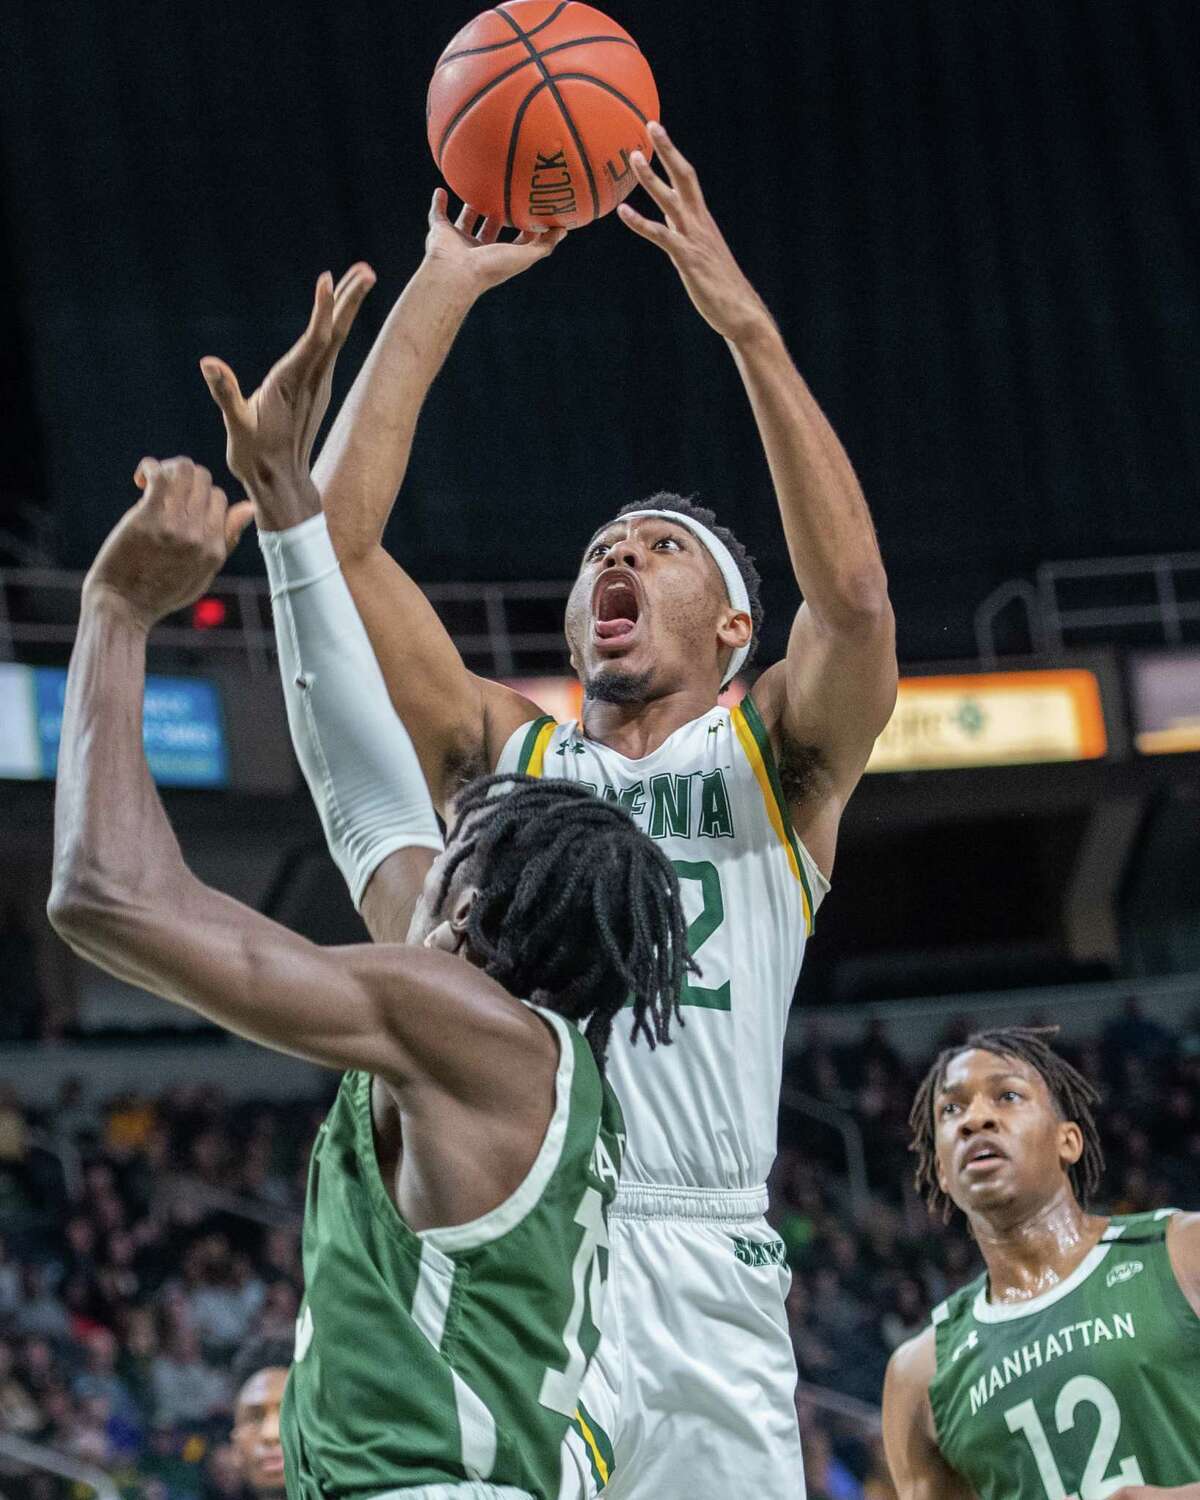 Siena College junior Jalen Pickett takes a jumper over Manhattan junior Michael during a Metro Atlantic Athletic Conference game at the Times Union Center in Albany, NY on Sunday, Feb. 16, 2020 (Jim Franco/Special to the Times Union.)